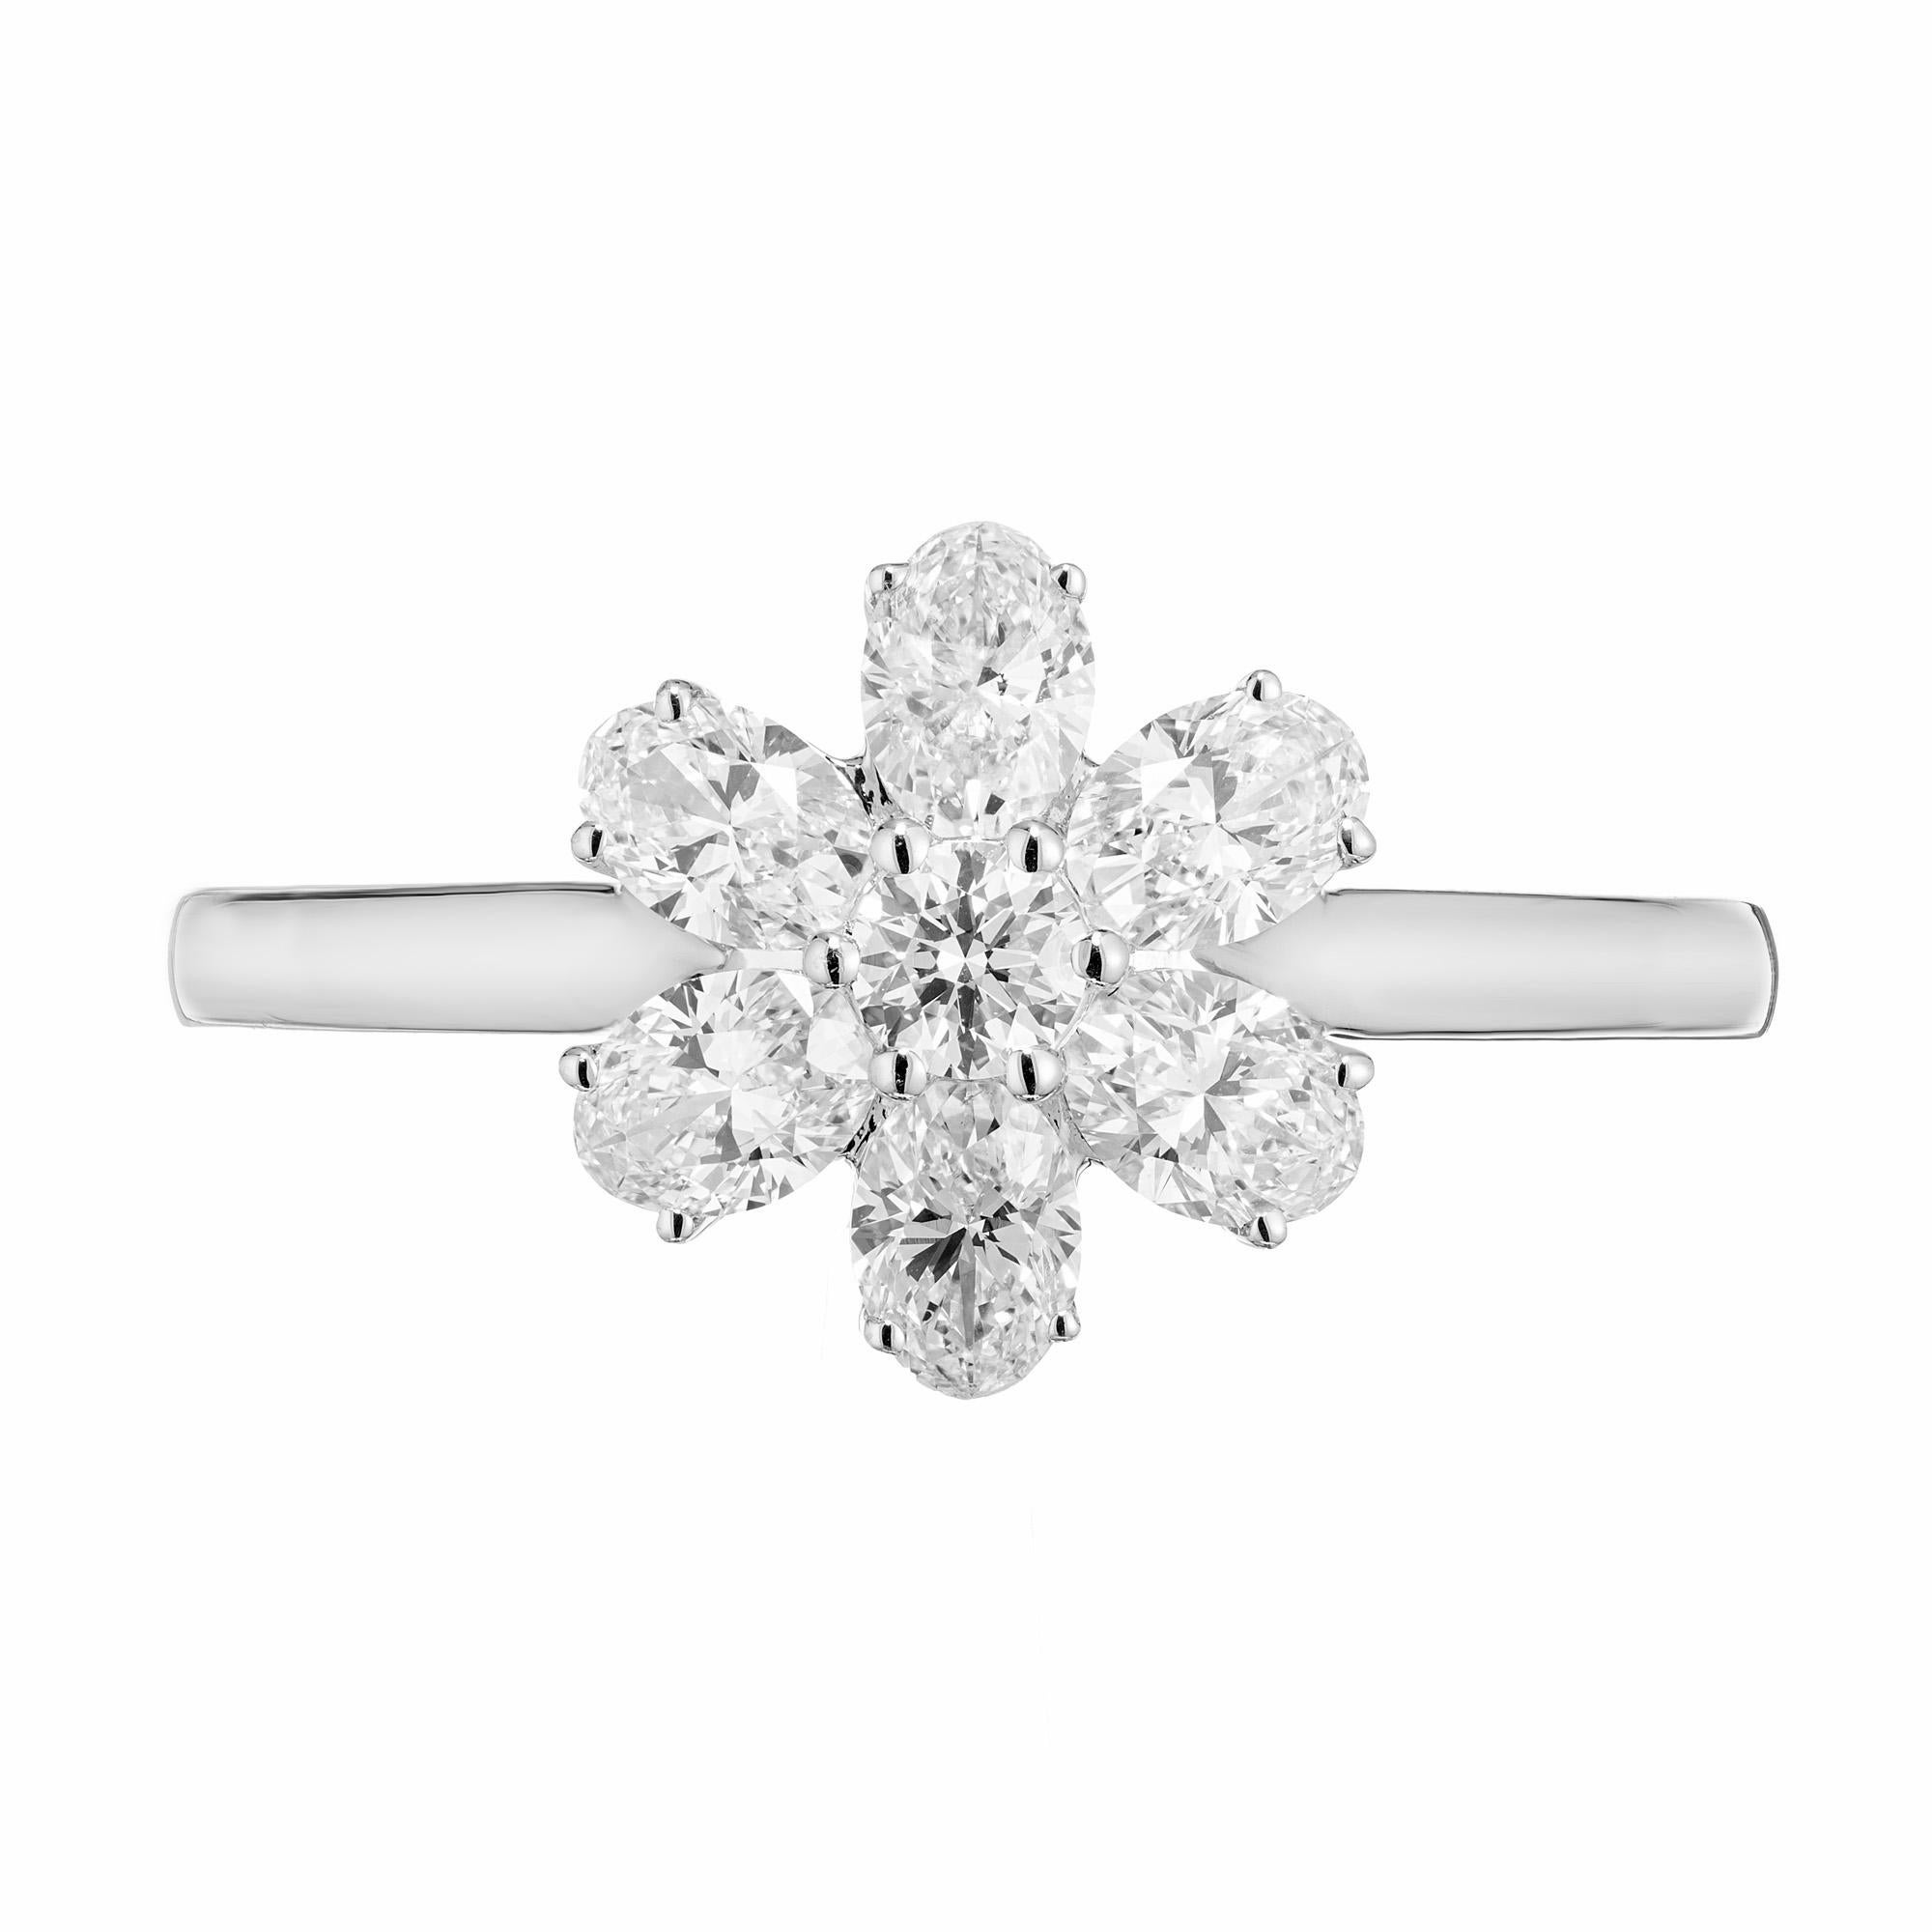 Six pointed diamond flower ring. 6 oval shape diamonds totaling .89cts with a single round brilliant cut diamond in the center. The flower style setting is 18k white gold and designed for these stones in the Peter Suchy Workshop. 

6 oval cut